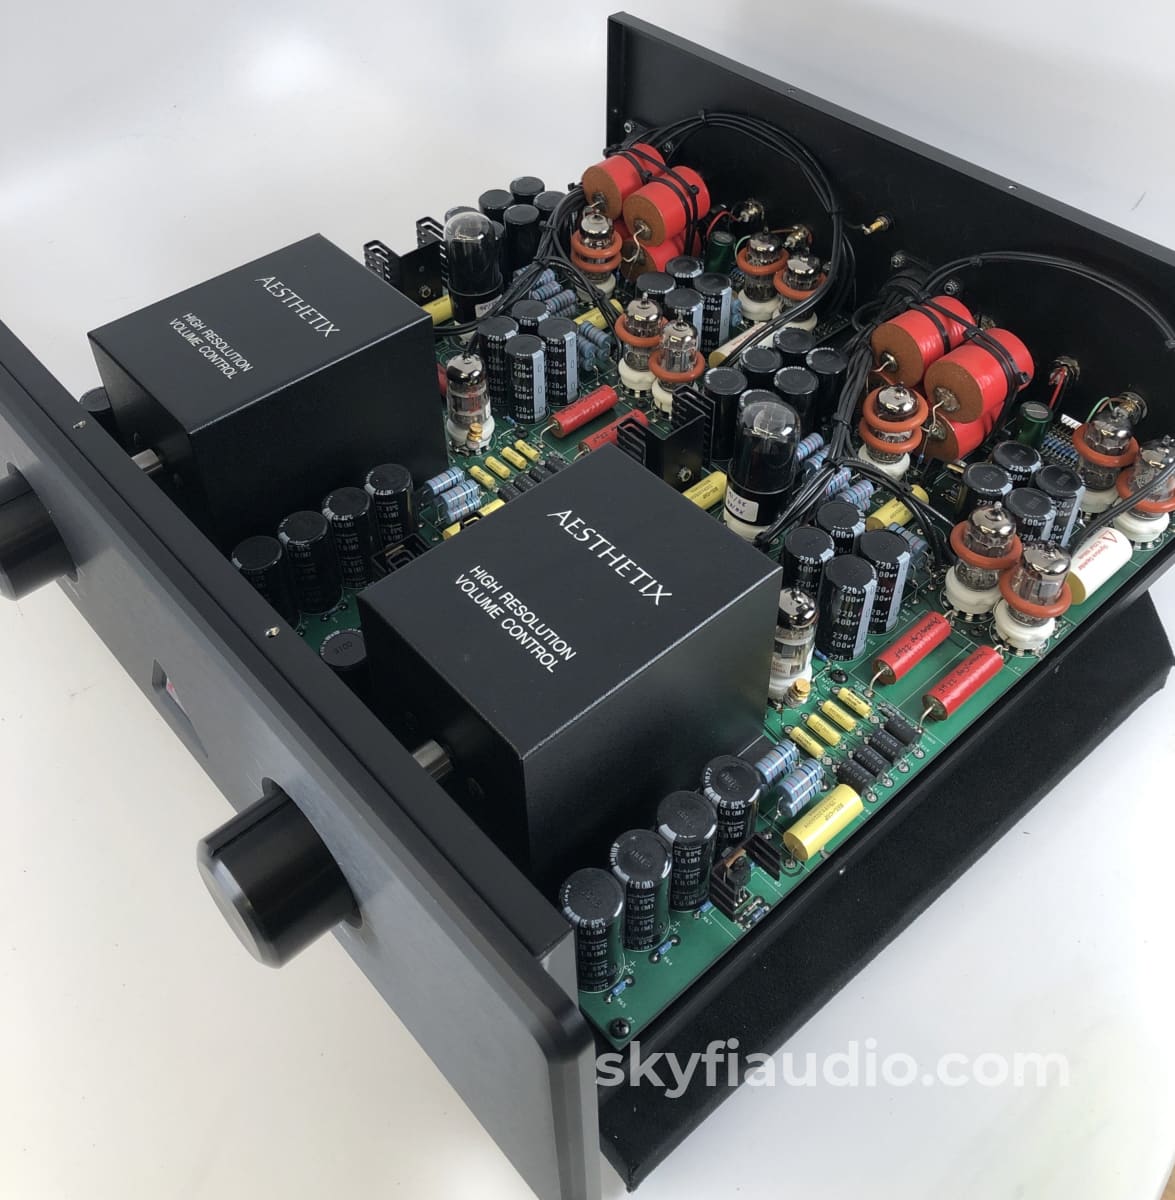 Aesthetix Io Signature All-Tube Phono Stage With Dual Power Supplies Preamplifier